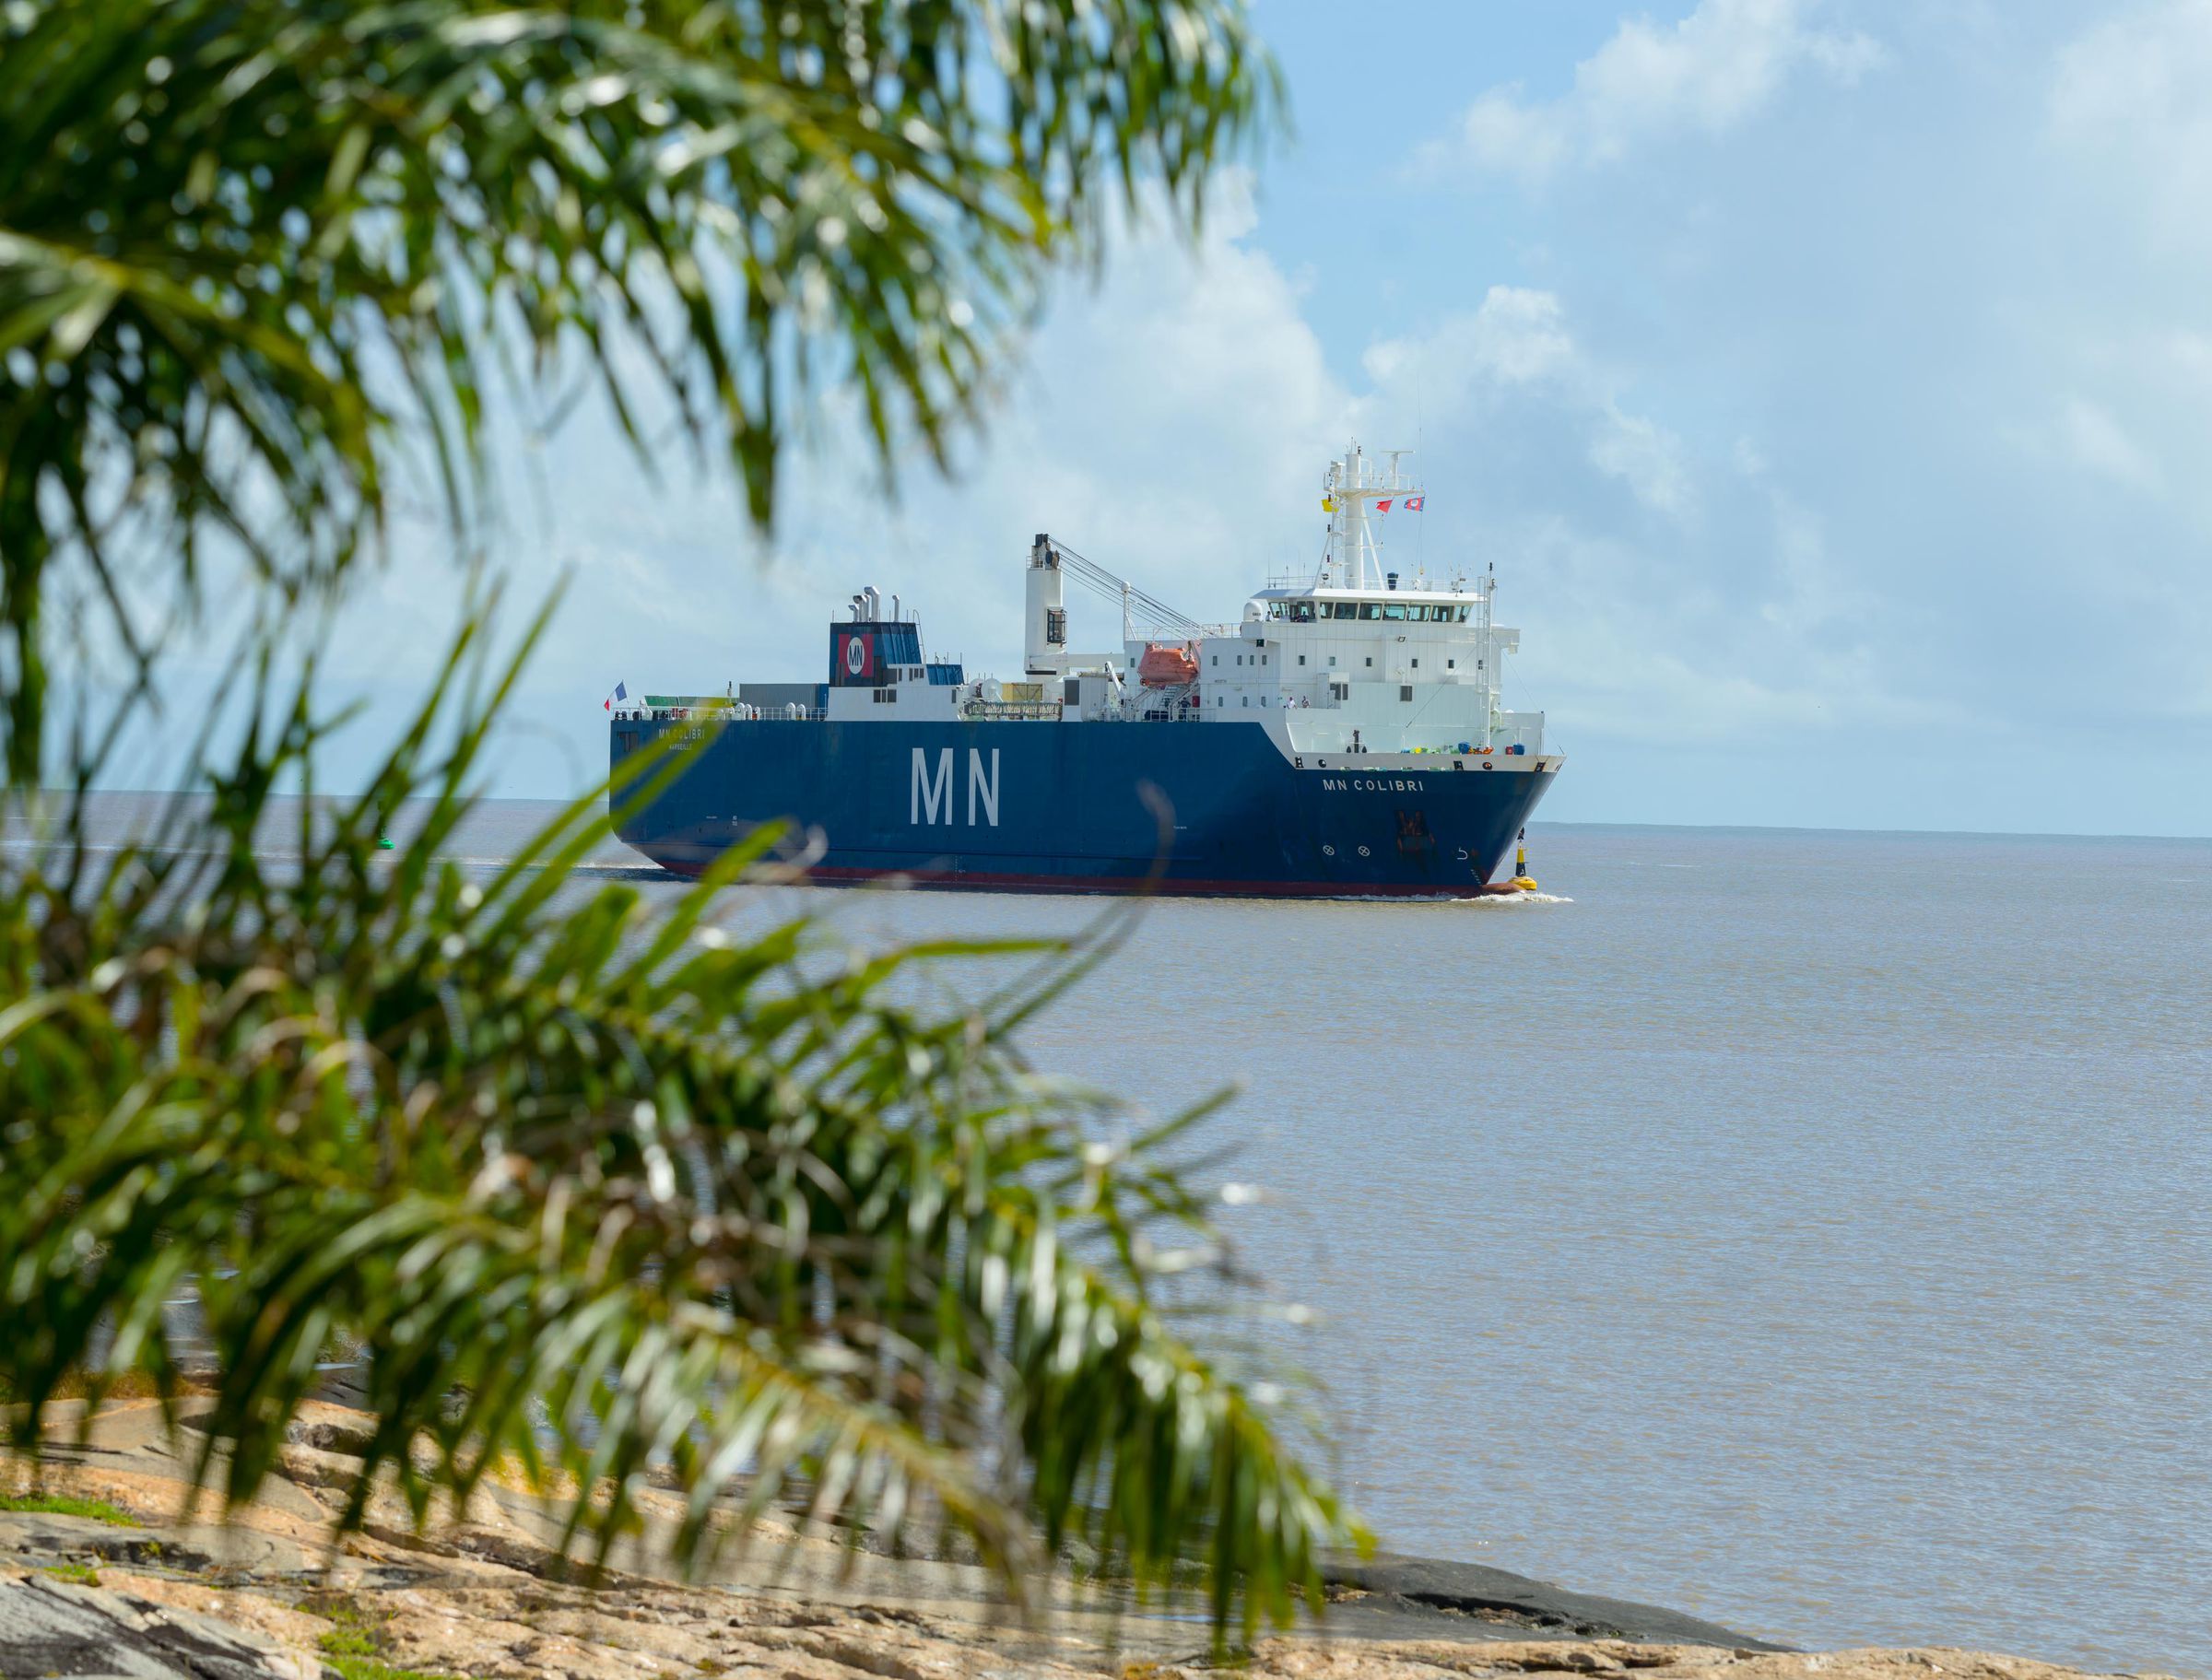 JWST arriving in French Guiana aboard the MN Colibri